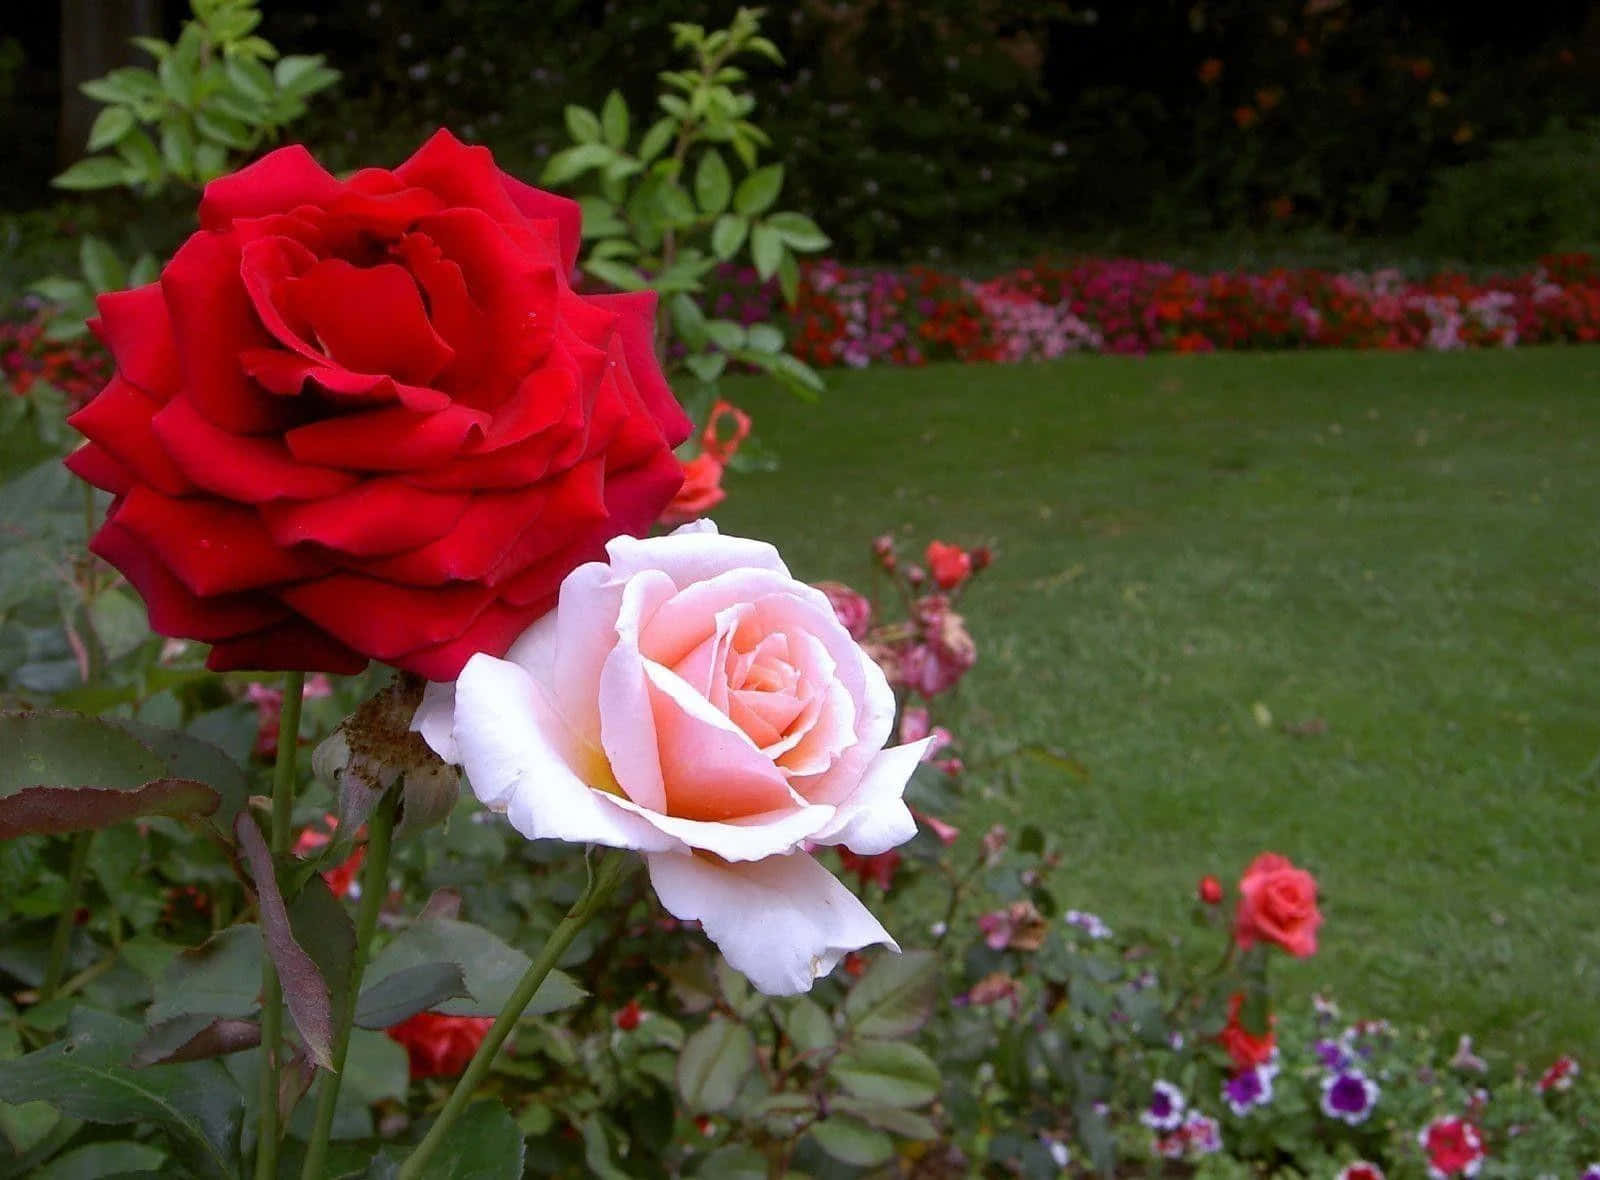 Garden Roses Red And White Near Grass Picture